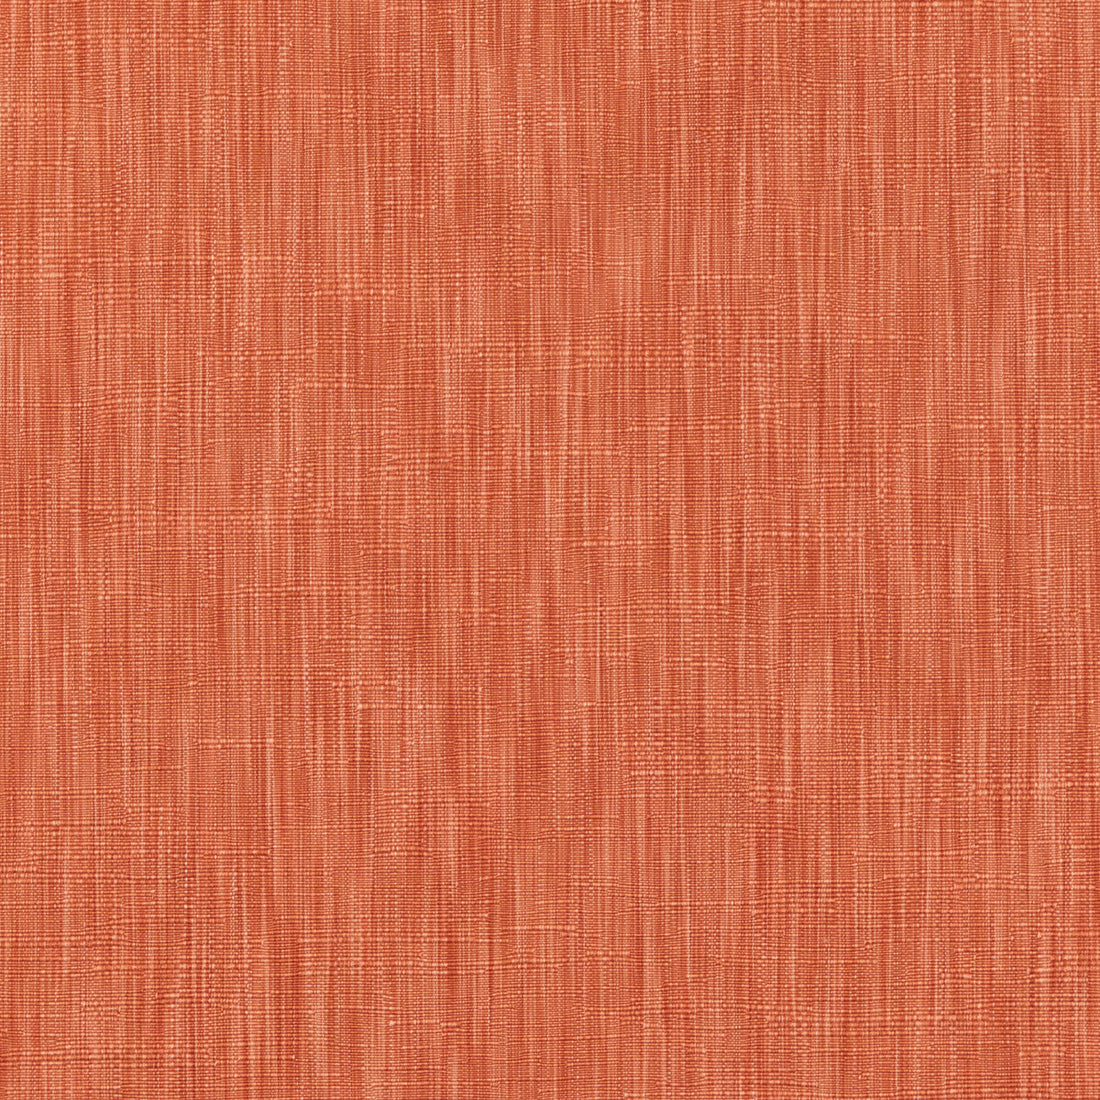 Saverne Texture fabric in orange color - pattern 8019122.12.0 - by Brunschwig &amp; Fils in the Alsace Weaves collection